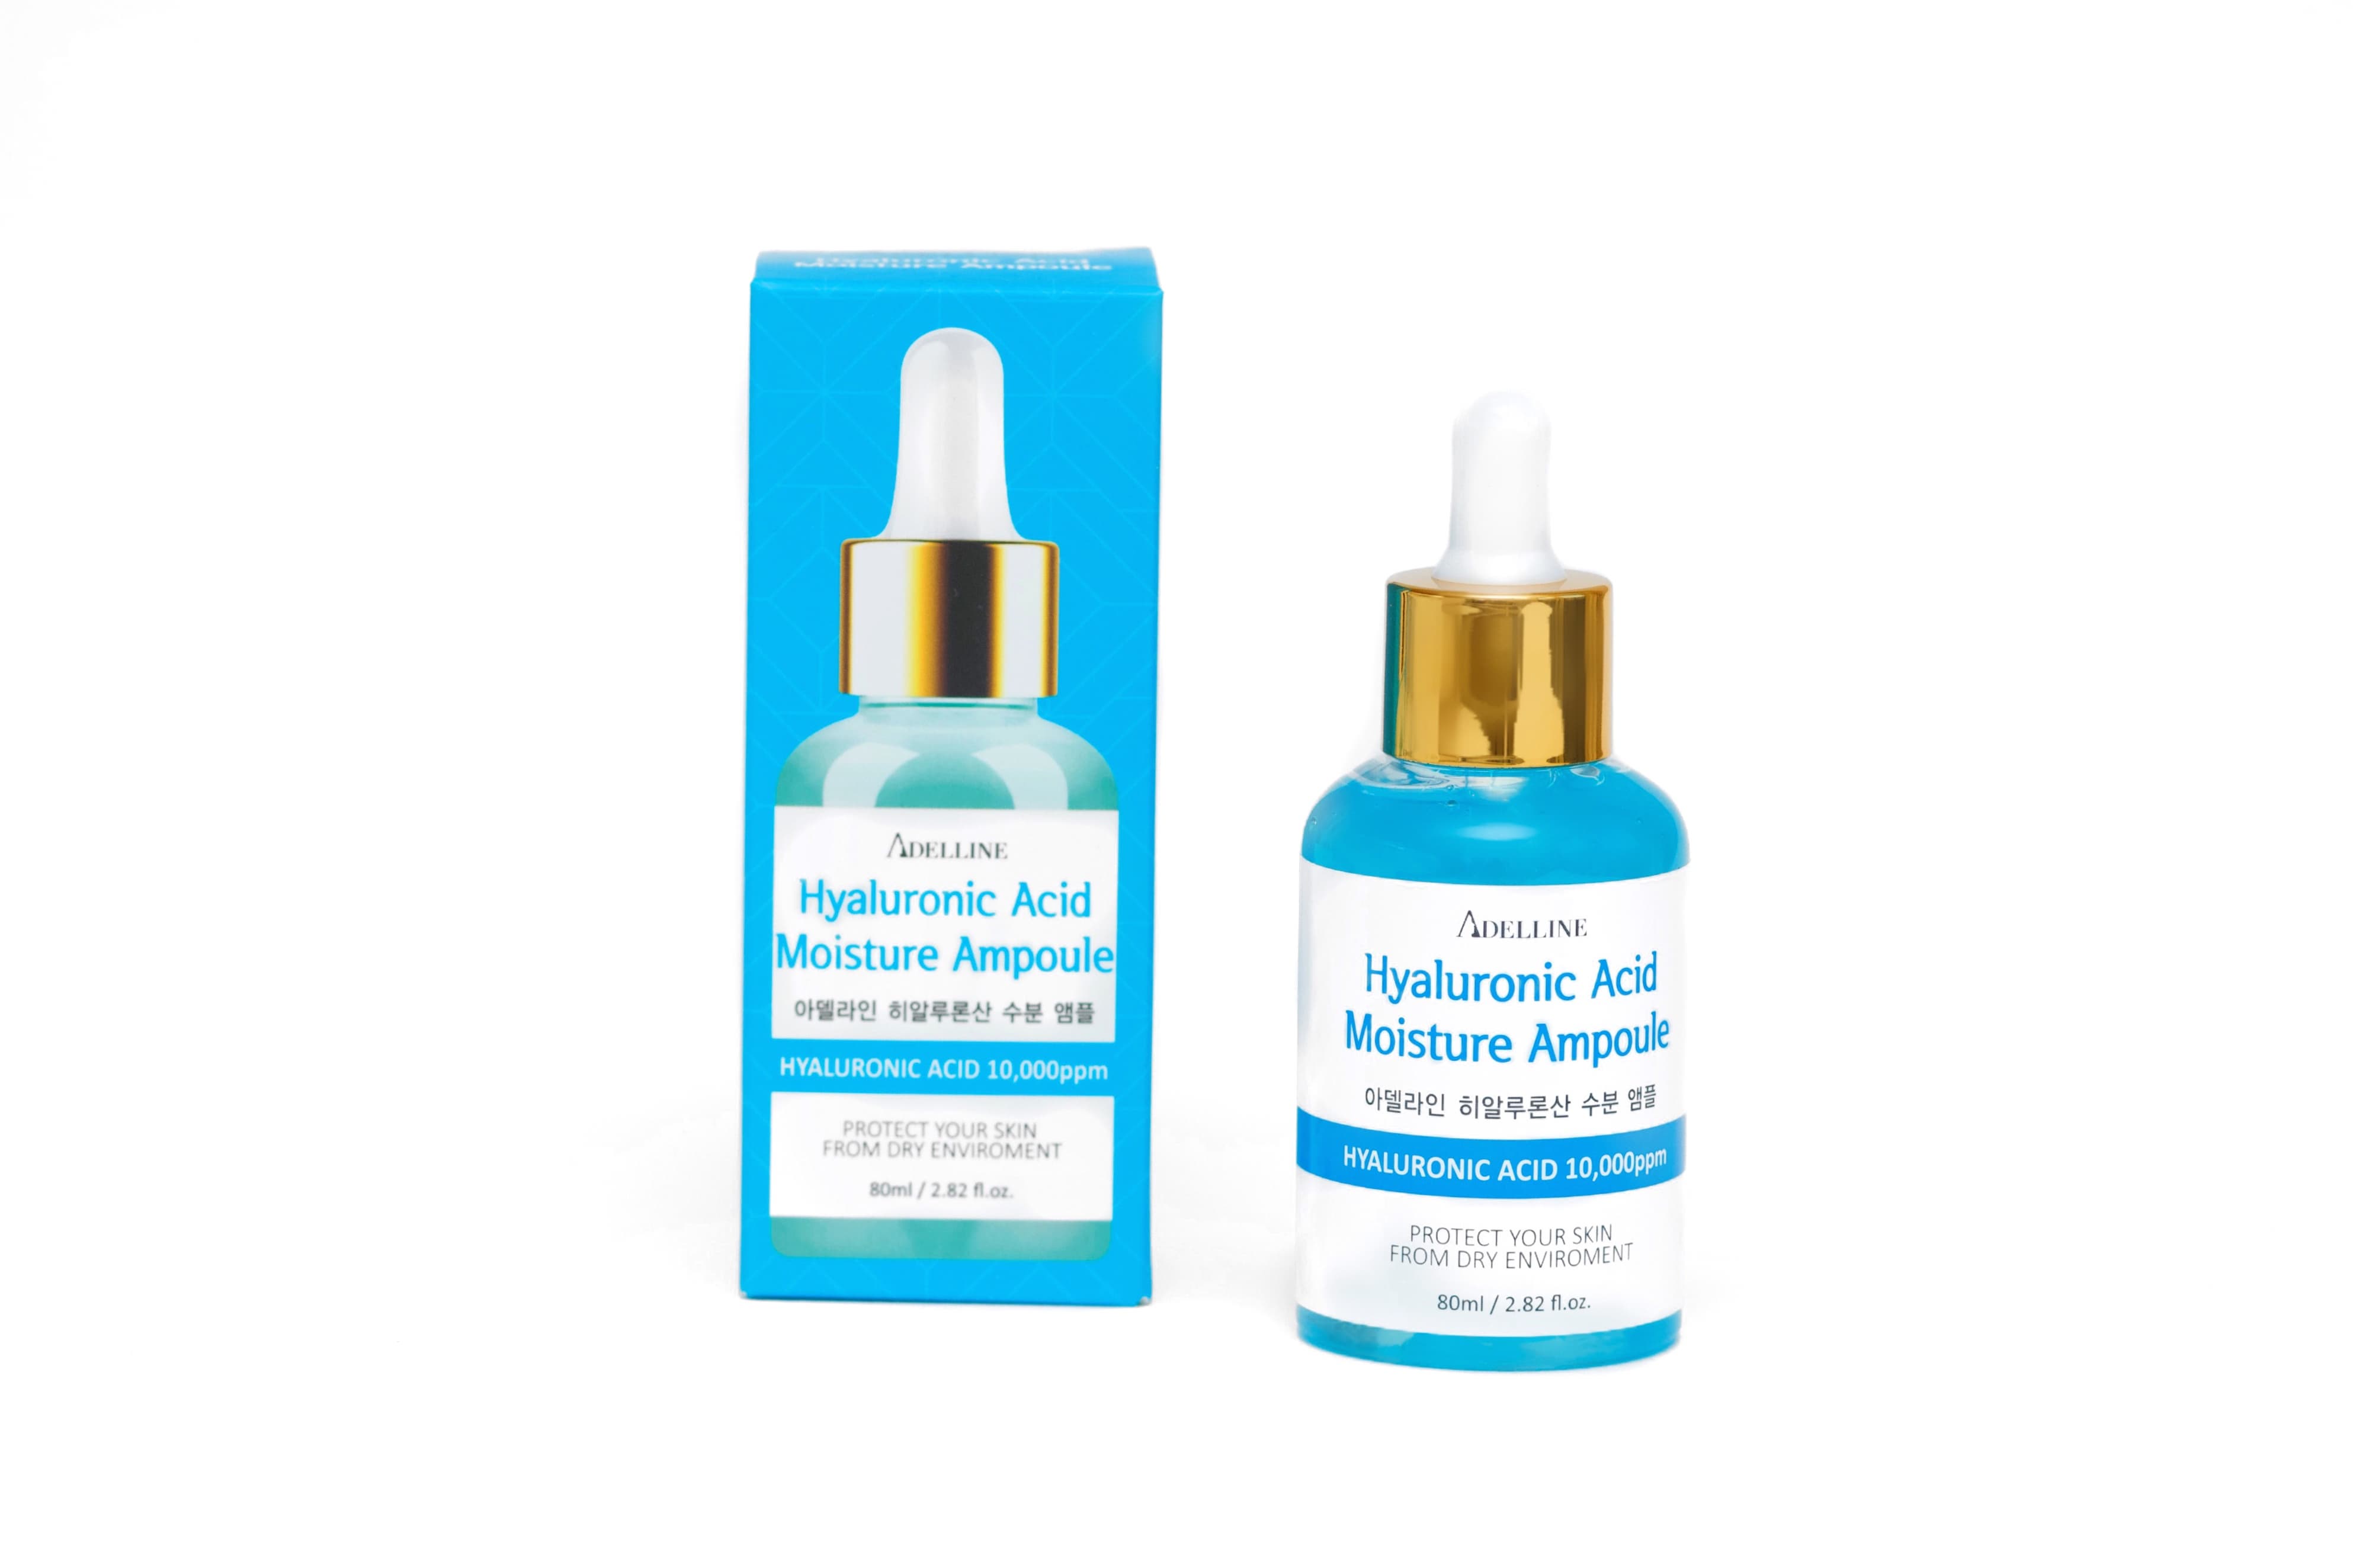 ADELLINE HYALURONIC ACID HYDRATING AMPOULE